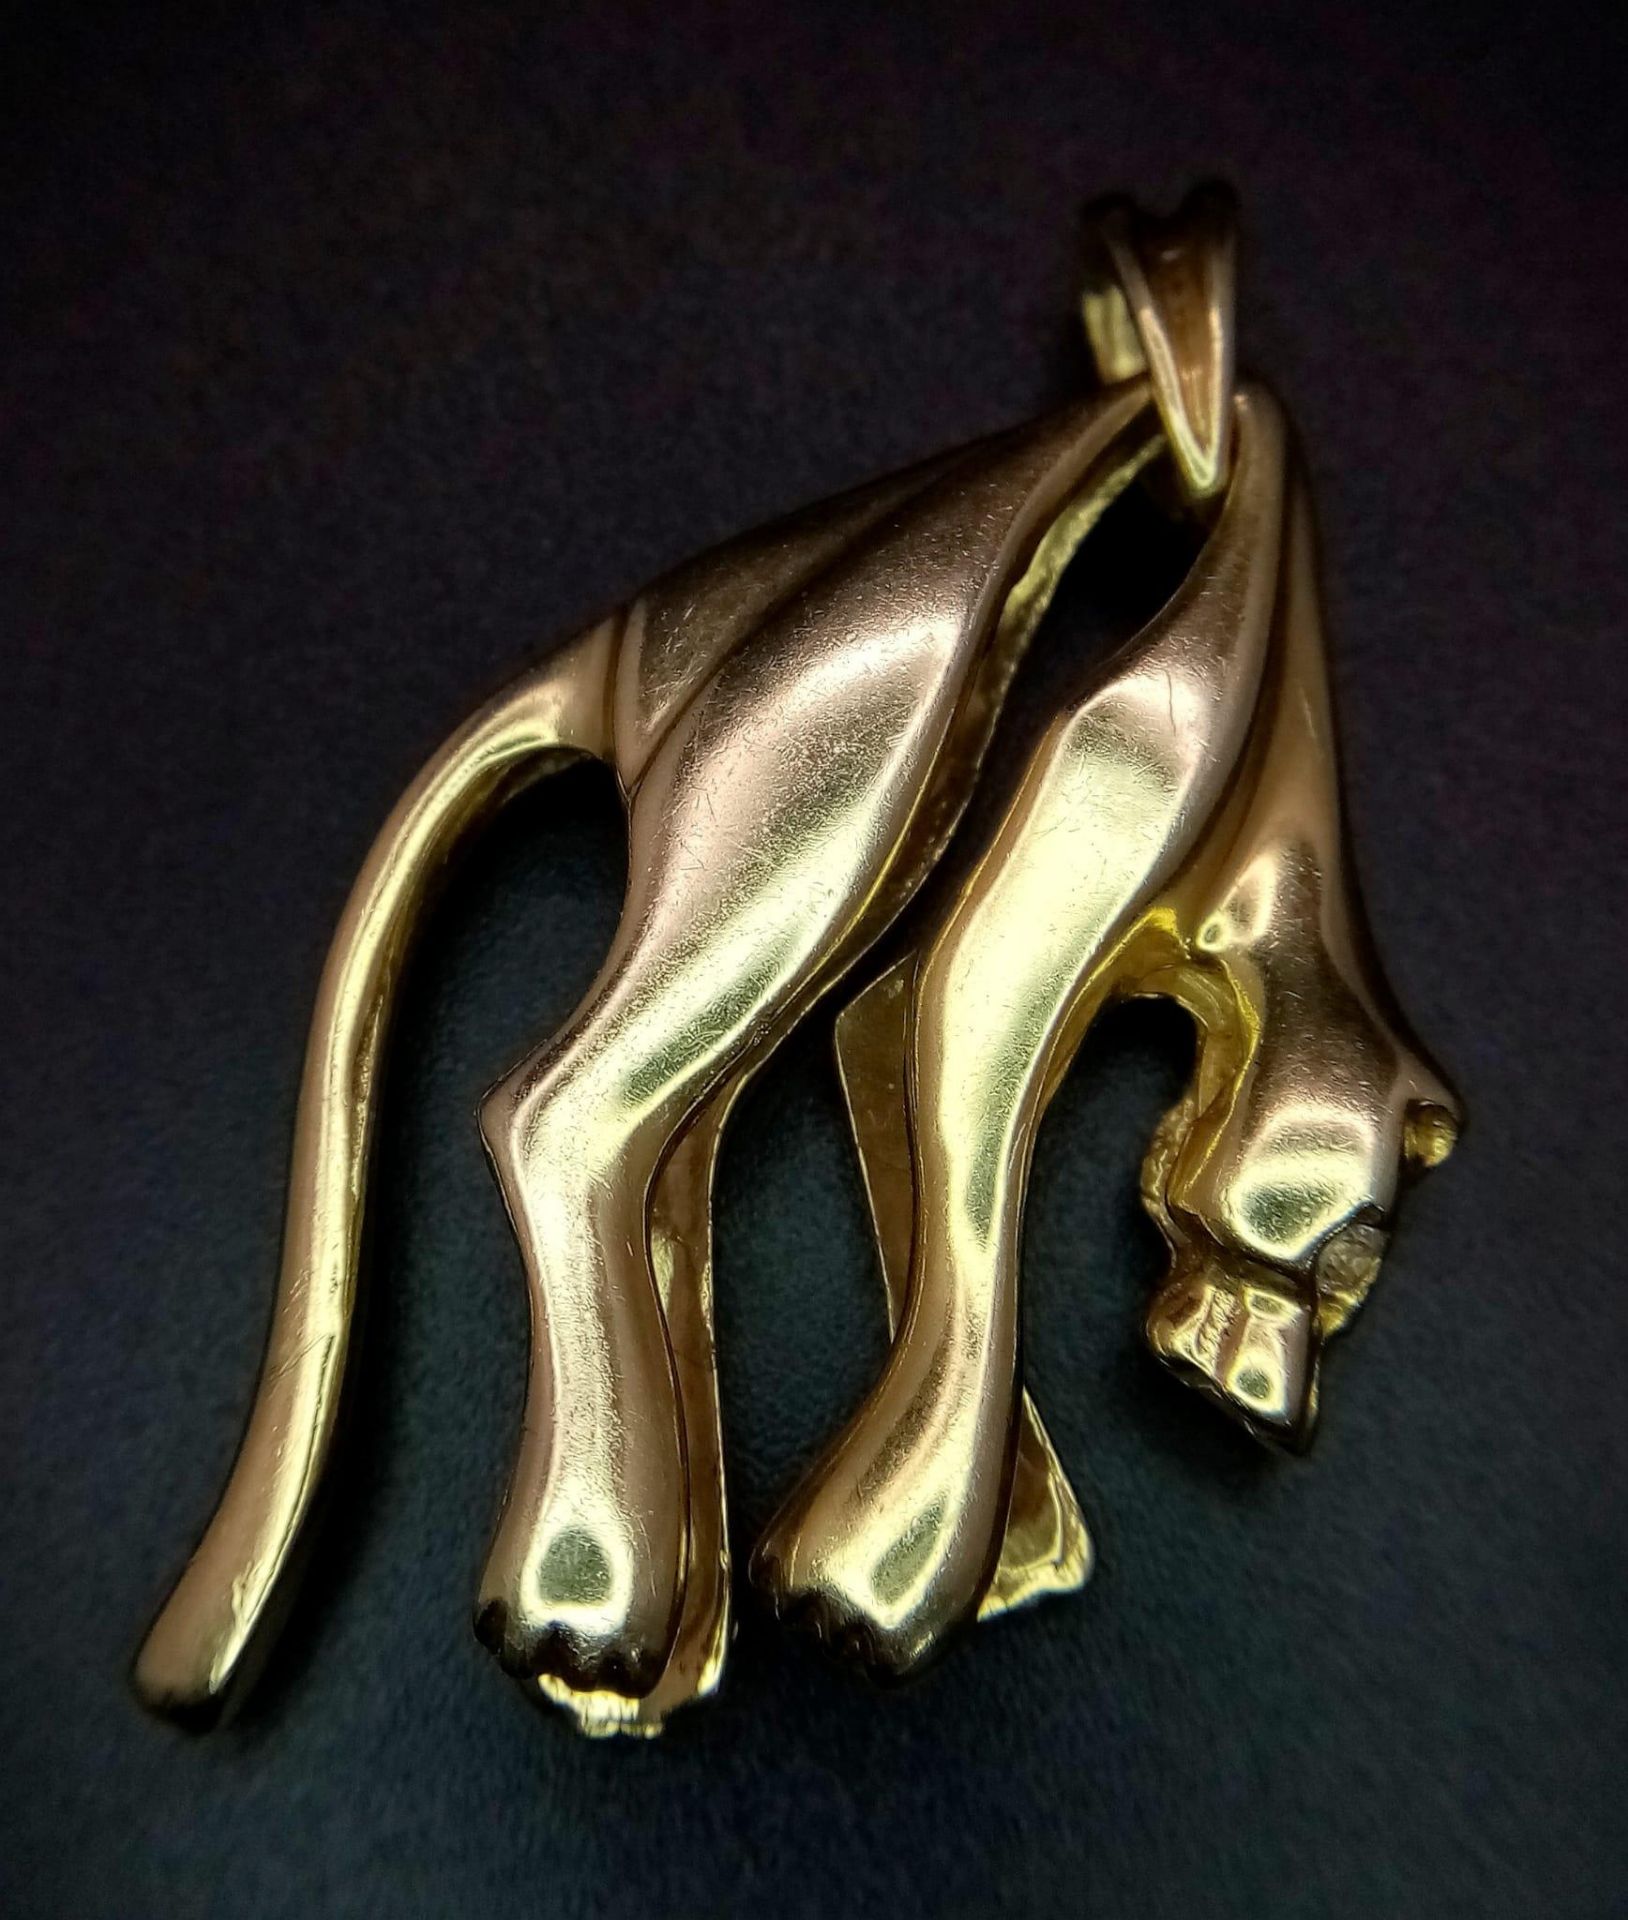 A 14K Yellow Gold Panther Pendant with Diamond Eyes. Ready to pounce - 3cm x 4cm. 17.58g total - Image 2 of 7